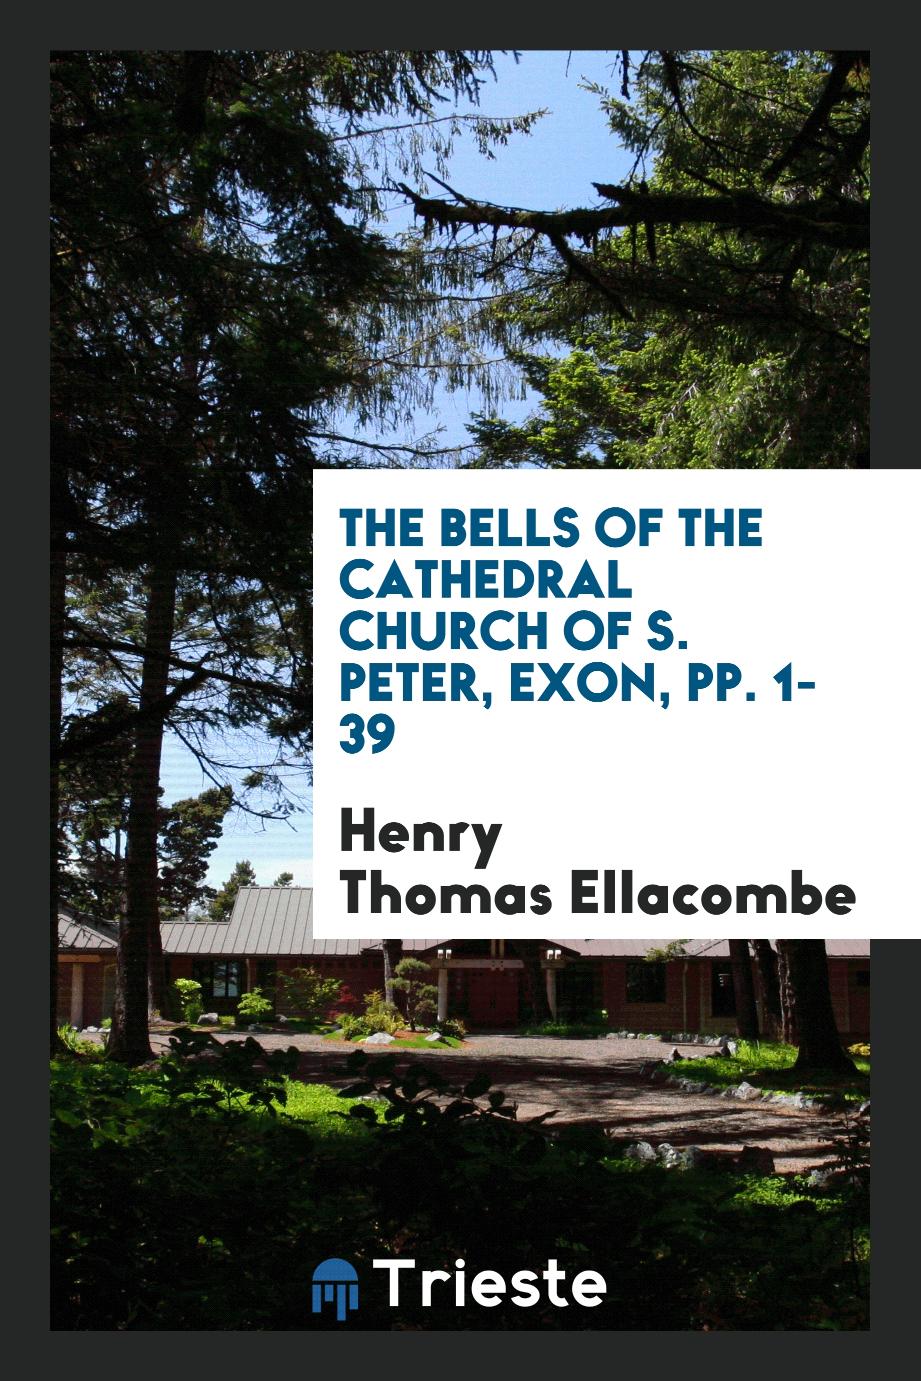 The Bells of the Cathedral Church of S. Peter, Exon, pp. 1-39